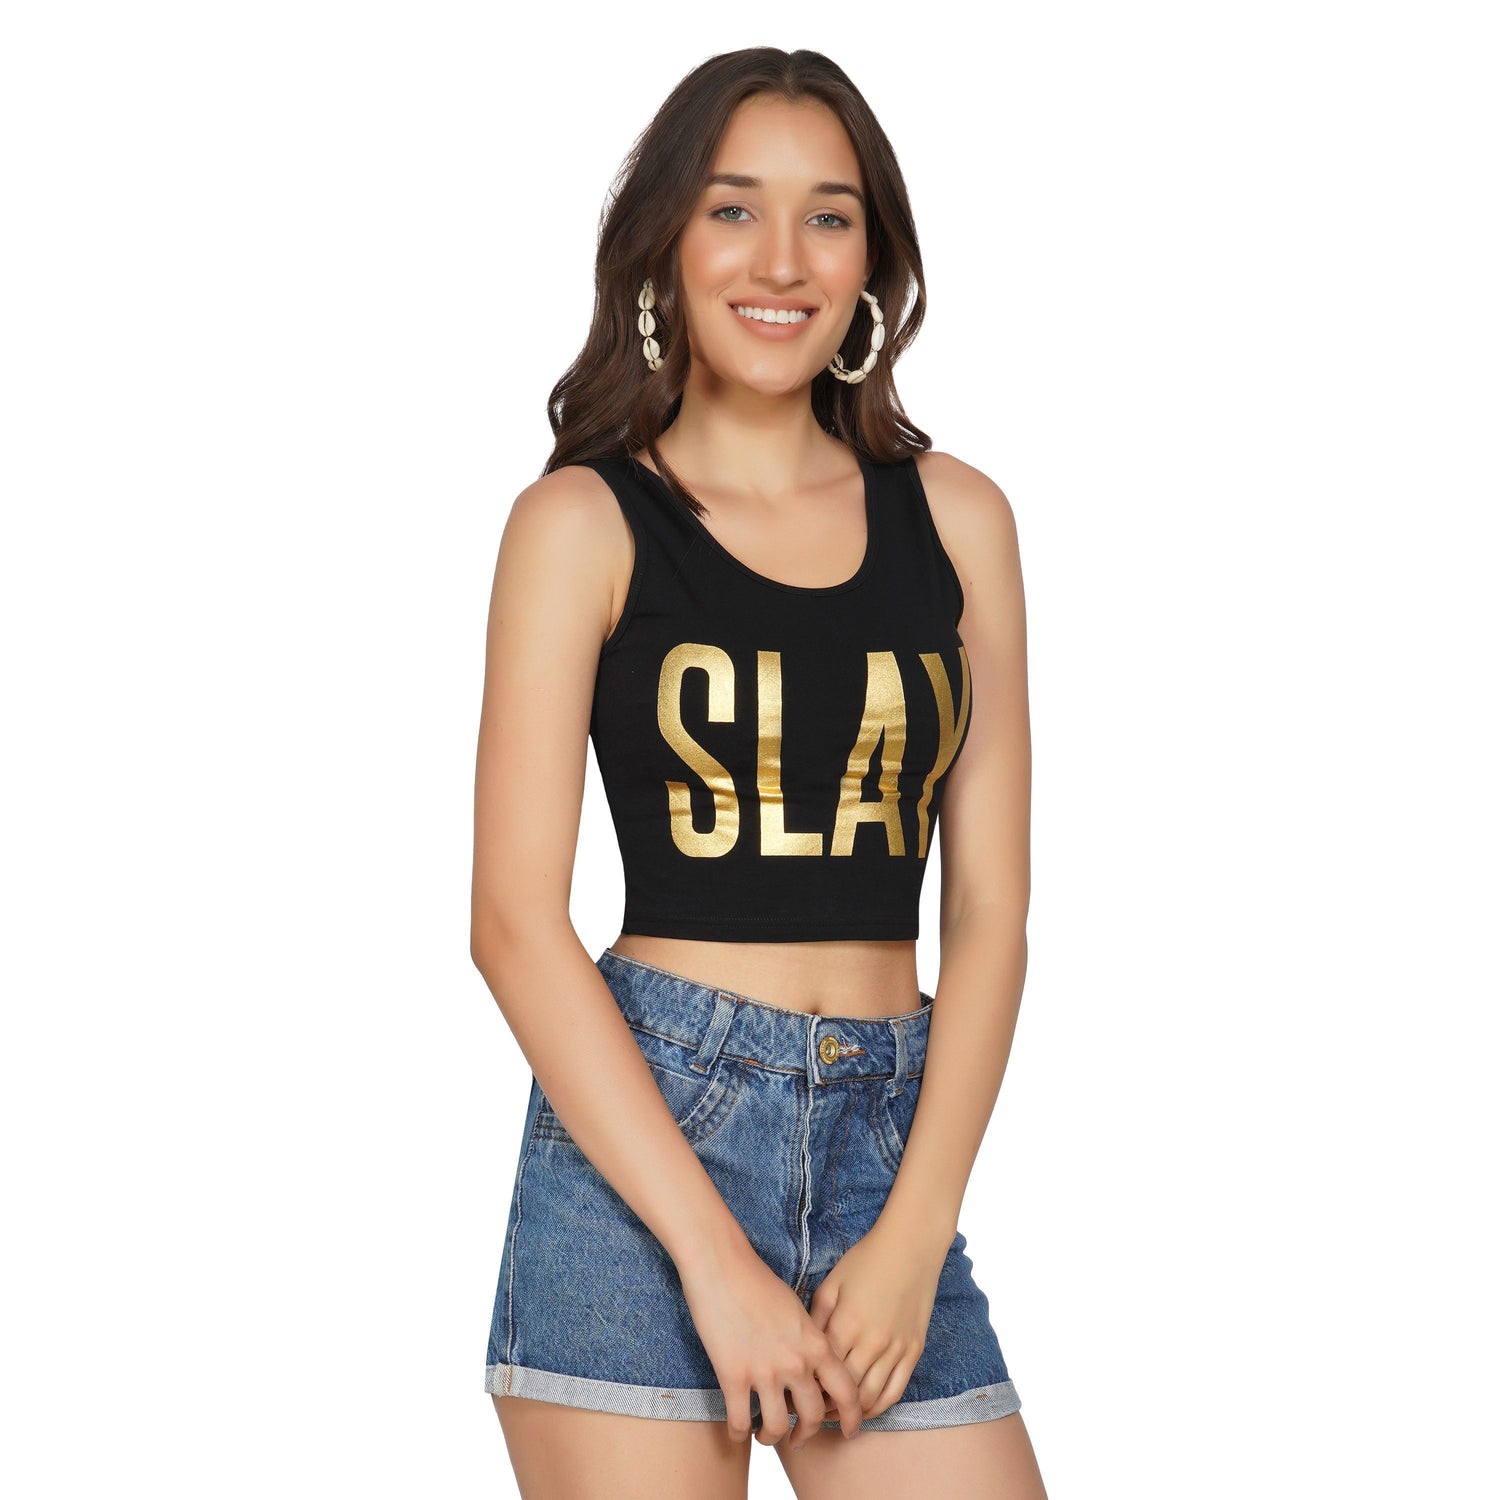 SLAY. Women's Limited Edition Gold Foil Reflective Print Crop Top-clothing-to-slay.myshopify.com-Crop Top